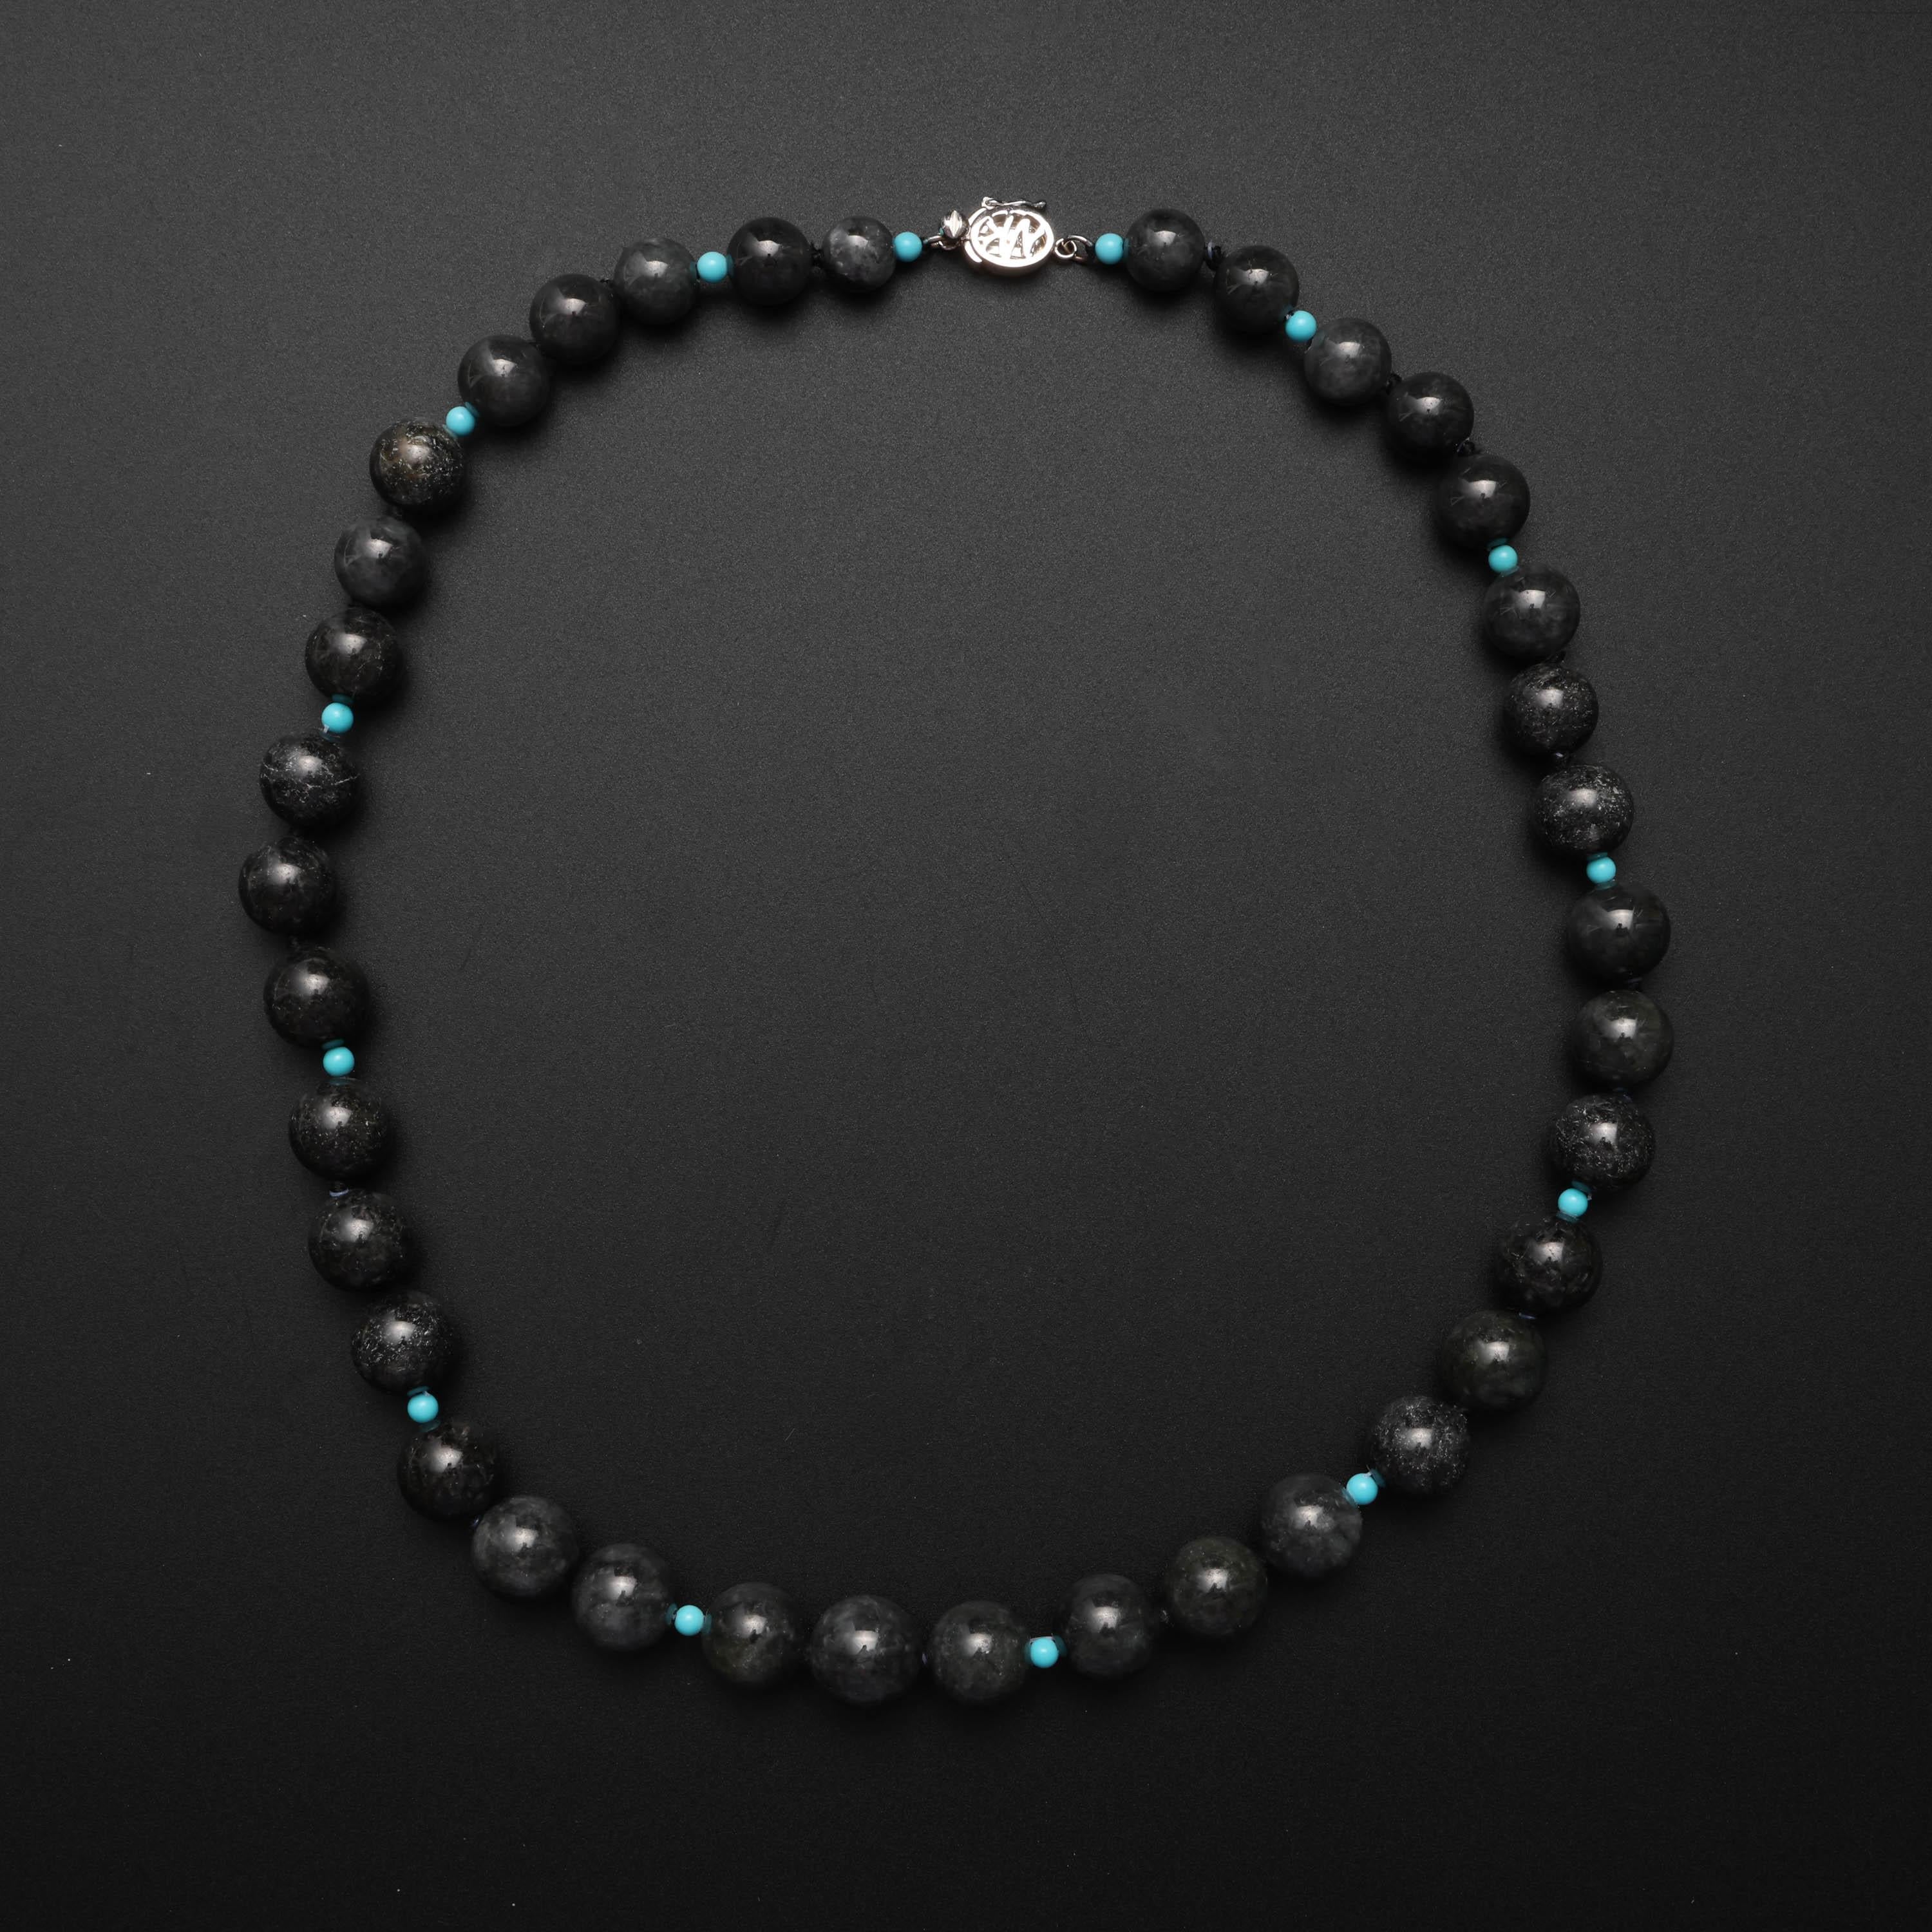 This luxurious and rare black jadeite jade necklace is composed of 37 certified untreated black jade beads that graduate in size from 8mm to 11mm. The strand is complimented by 14 3mm Robin's egg blue turquoise beads stationed along the strand. A